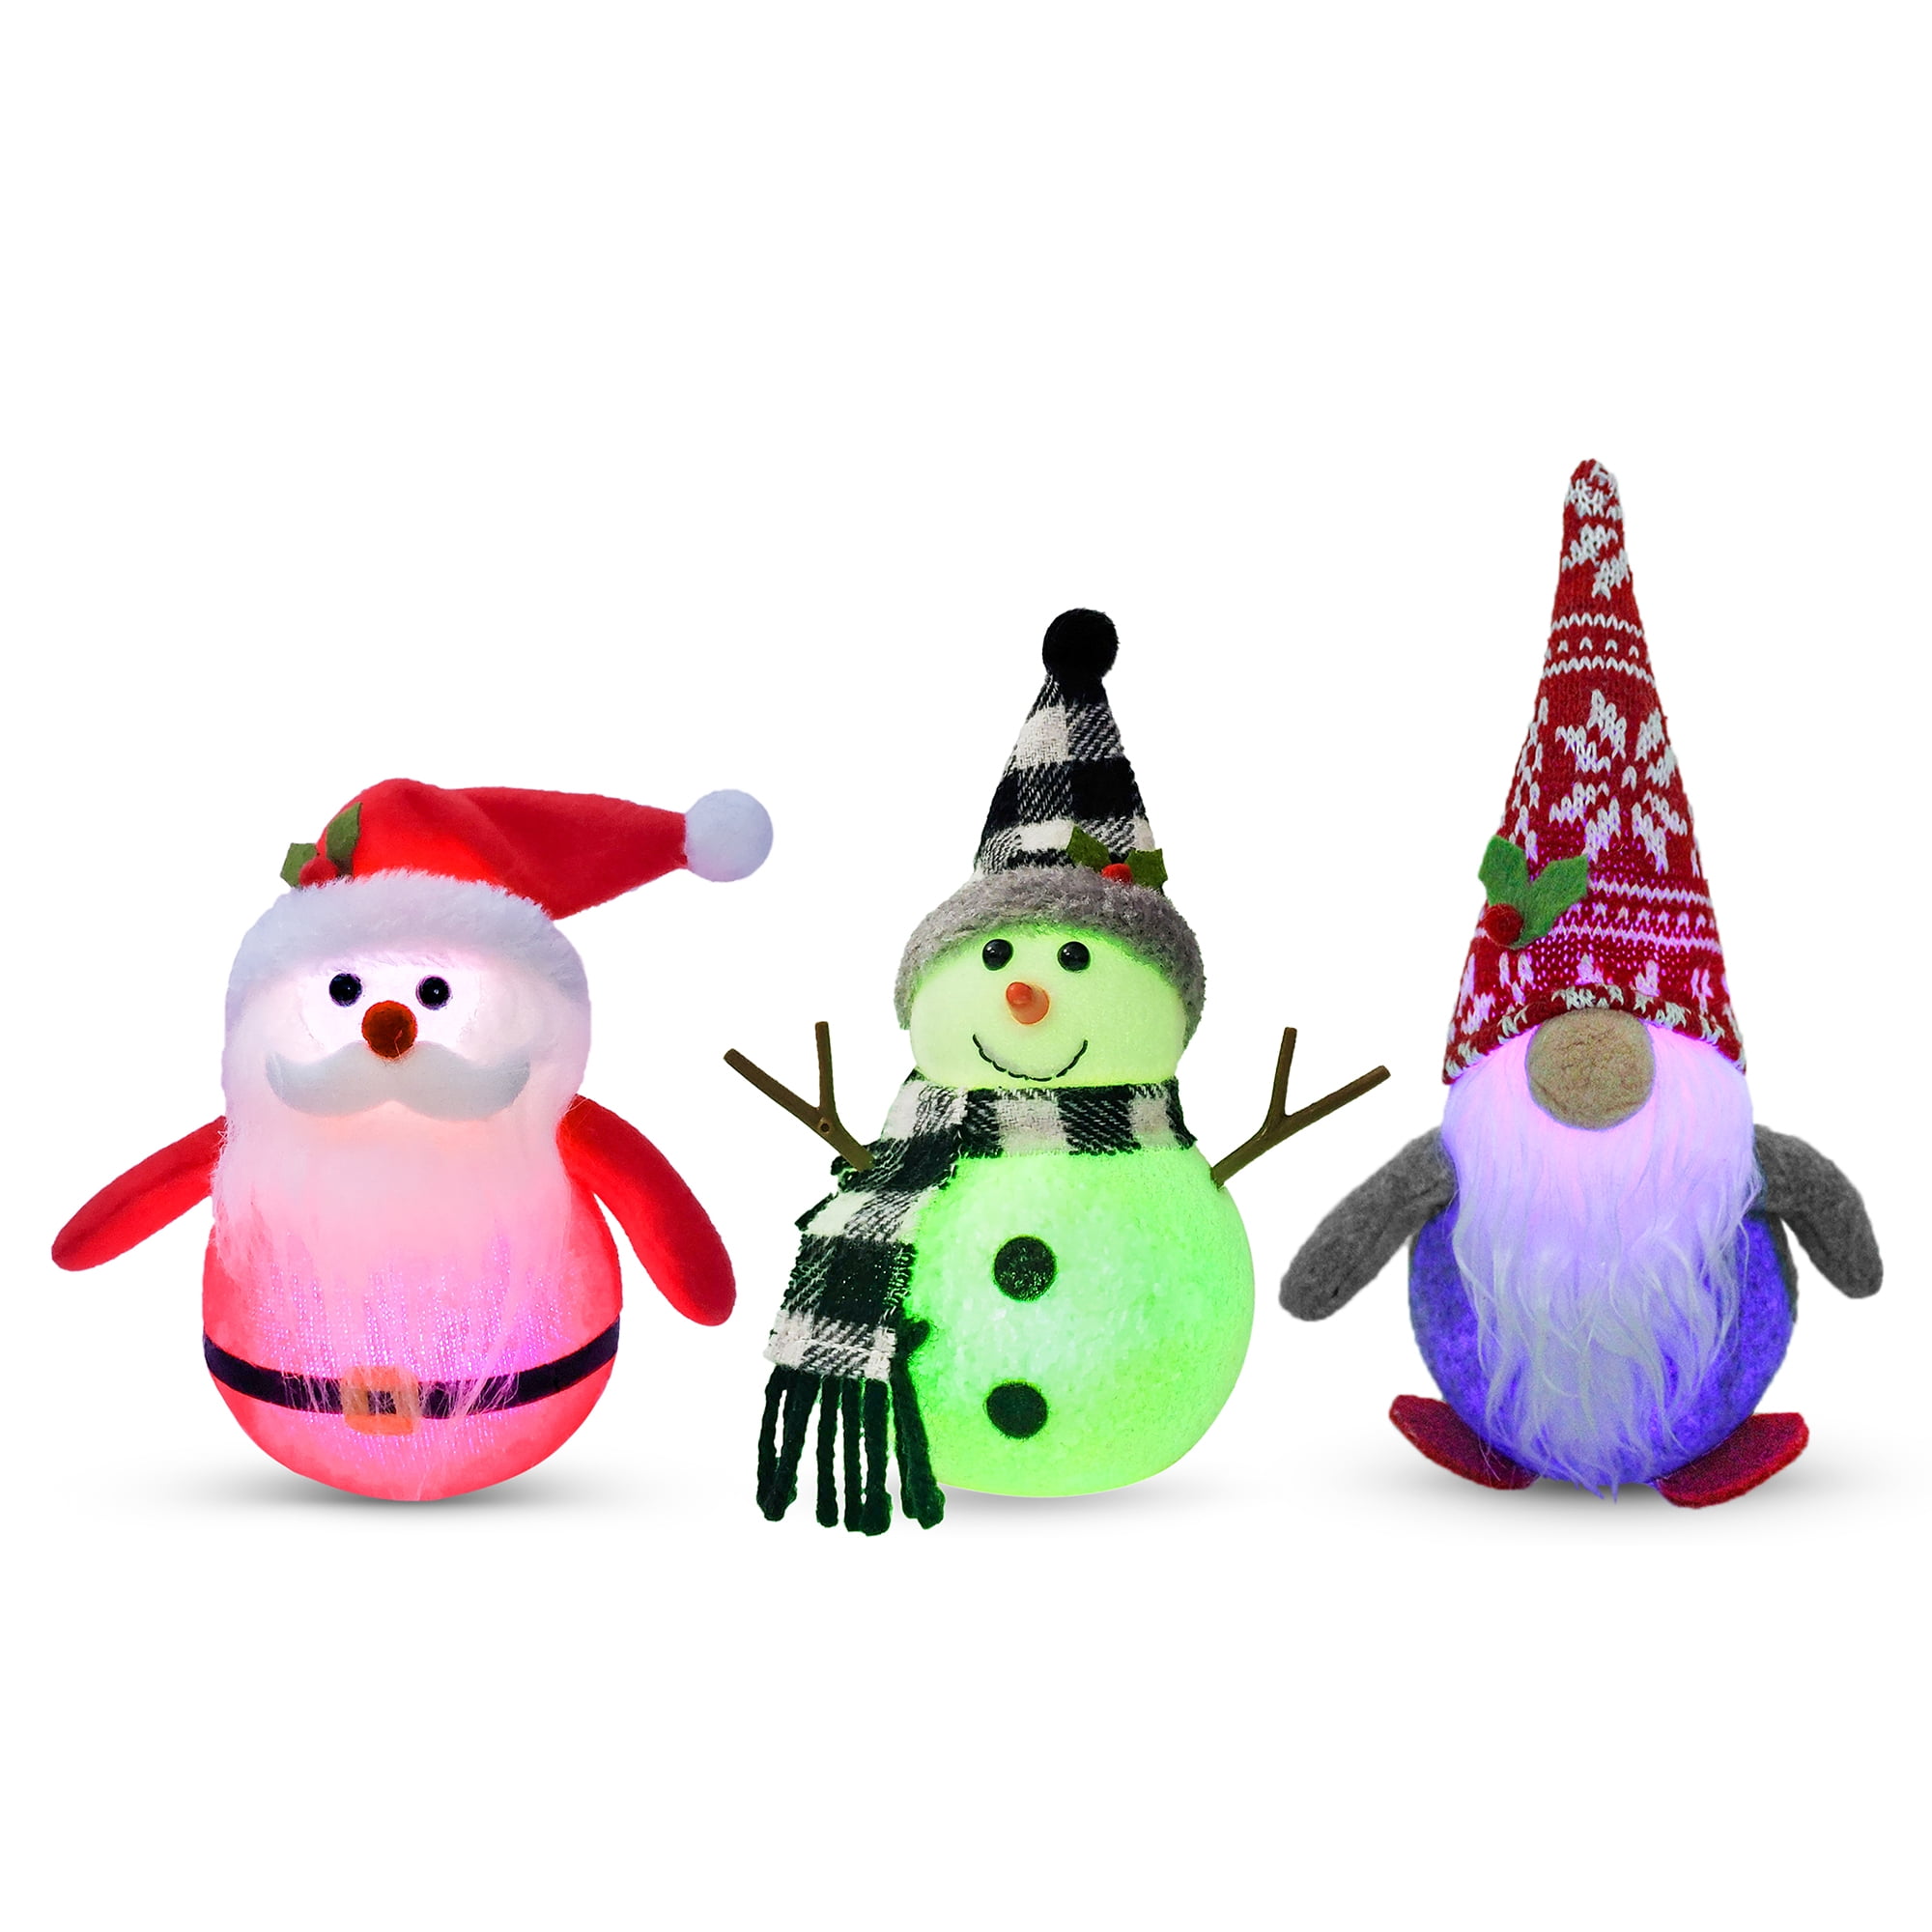 iEssentials USB Powered Snowman multi color changing LED's MERRY CHRISTMAS 